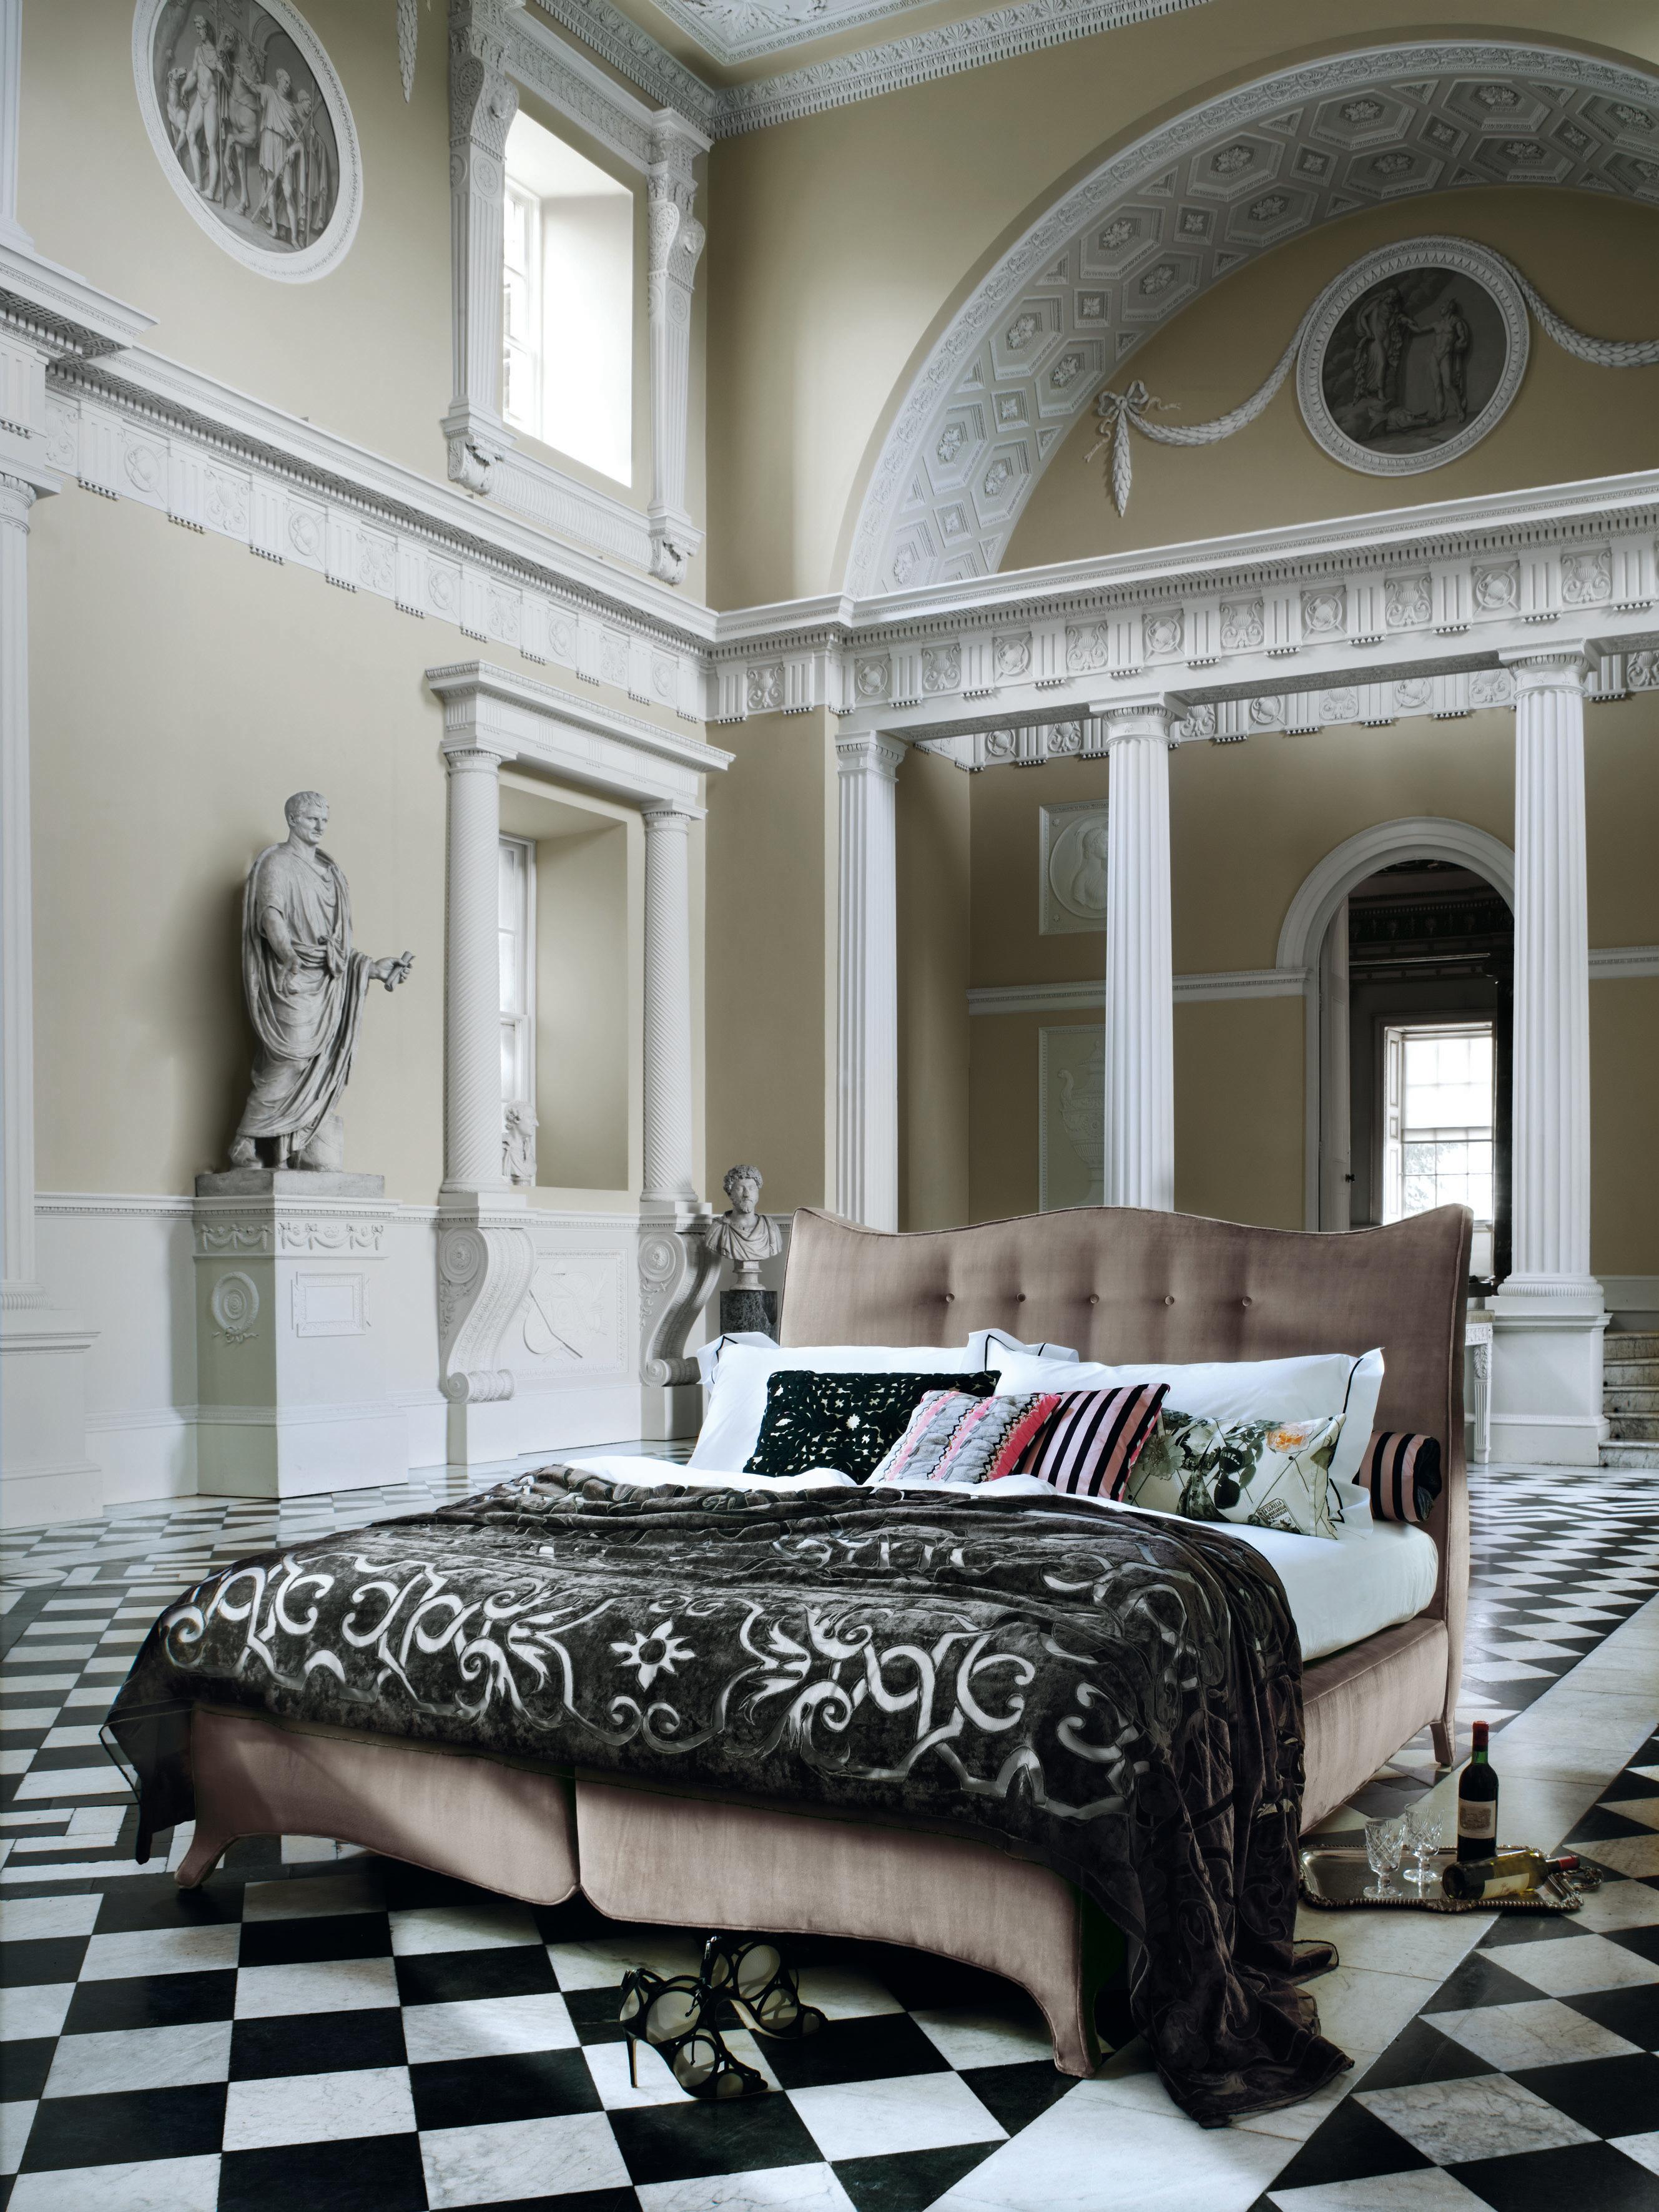 A Savoir classic design. Reminiscent of the sculptural and feminine lines of the baroque period, the exaggerated curves of the Penelope headboard and base evoke a feeling of grandeur. Legs are seamlessly upholstered into the base continuing the